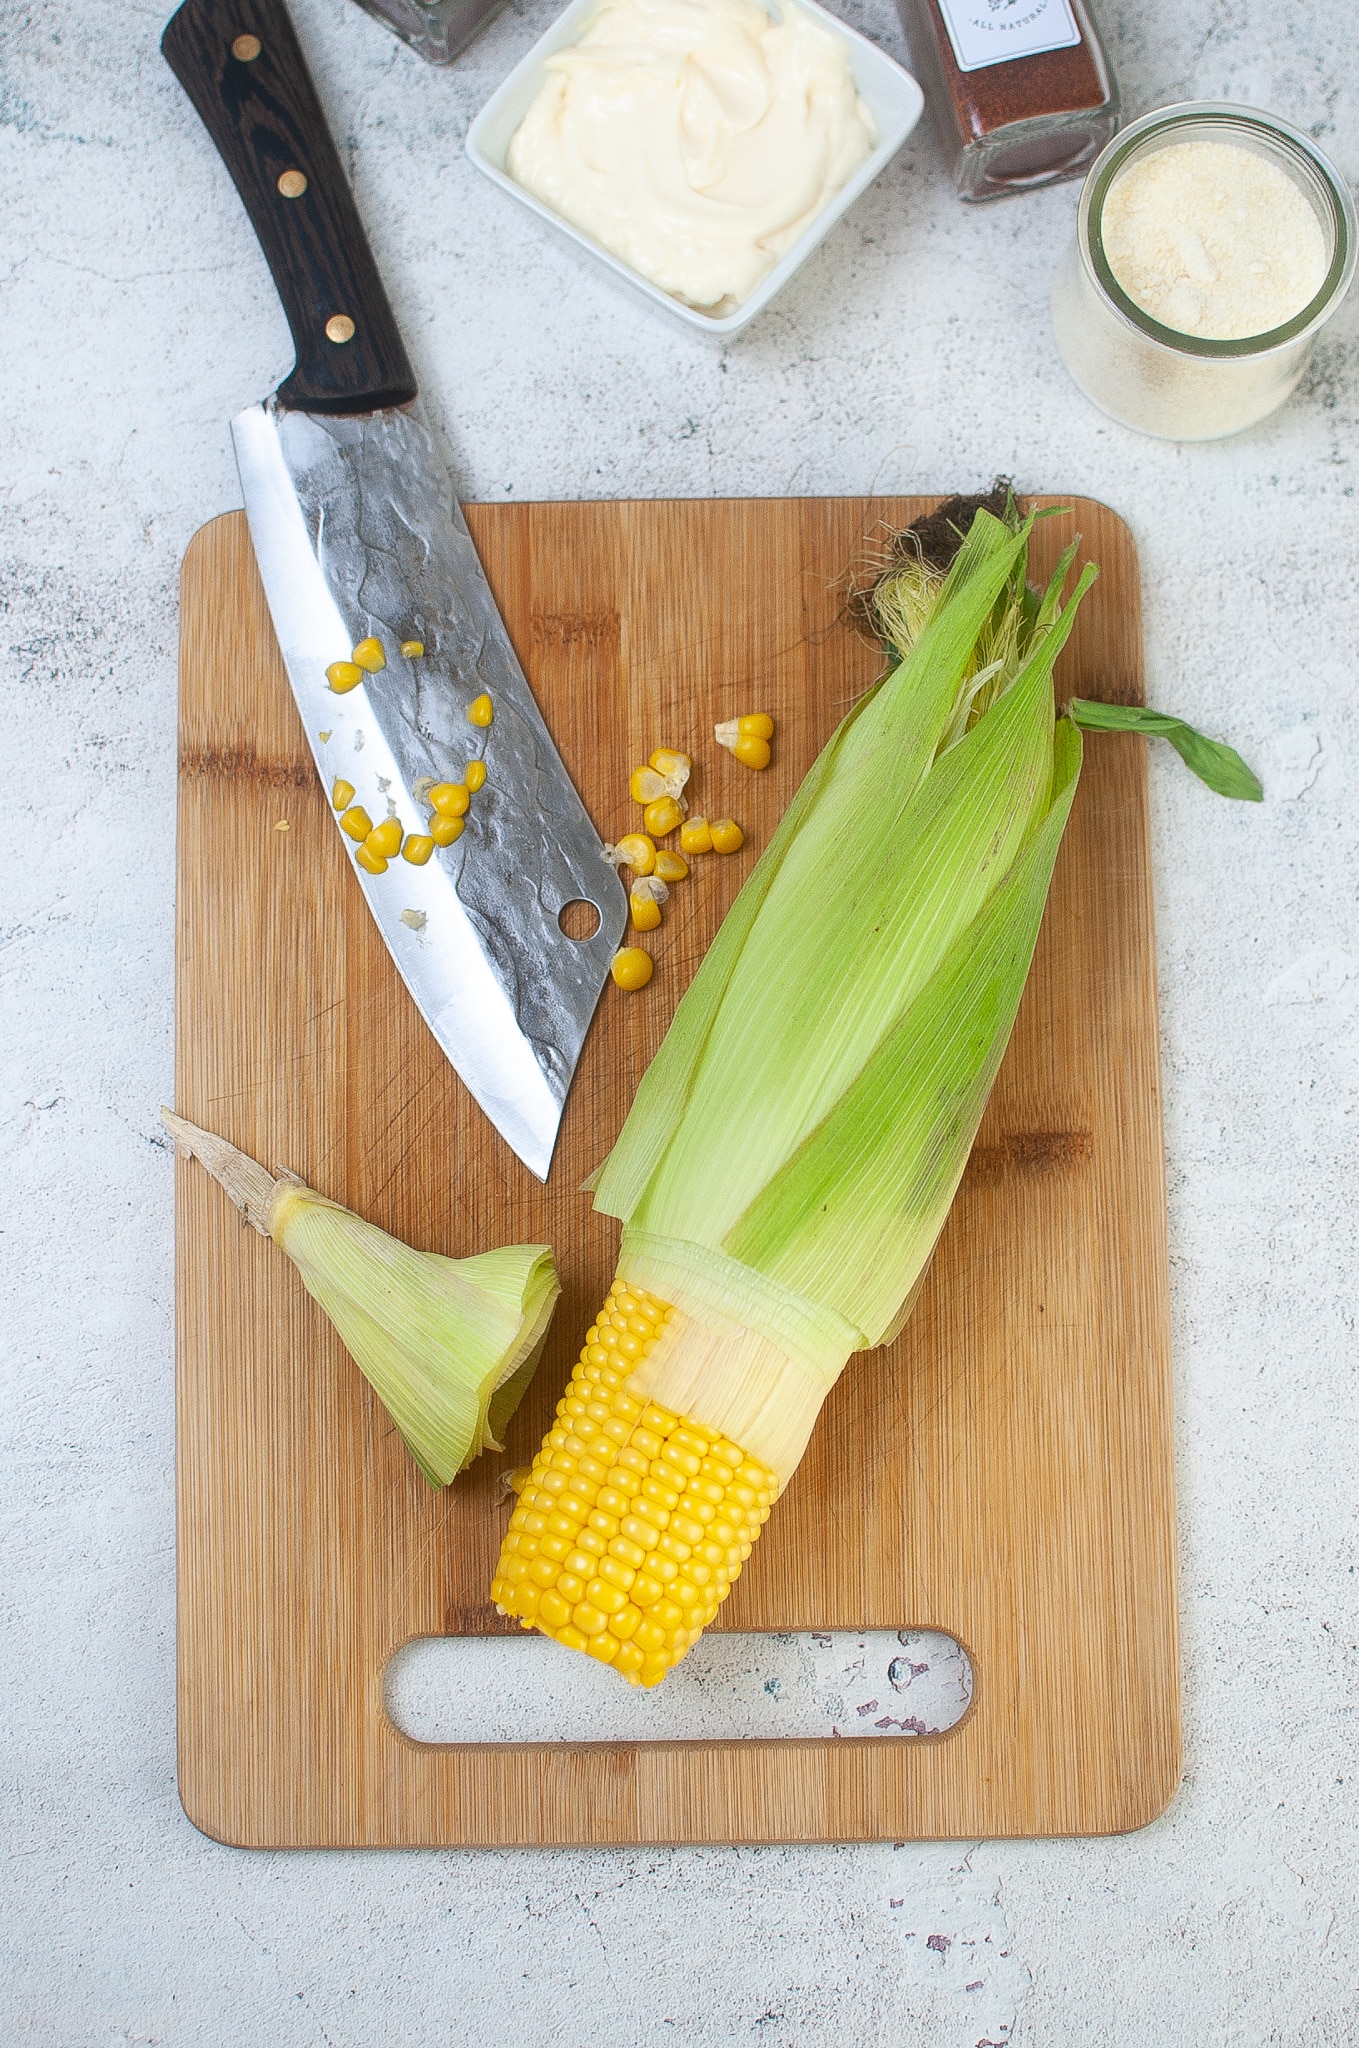 corn being removed from the shuck